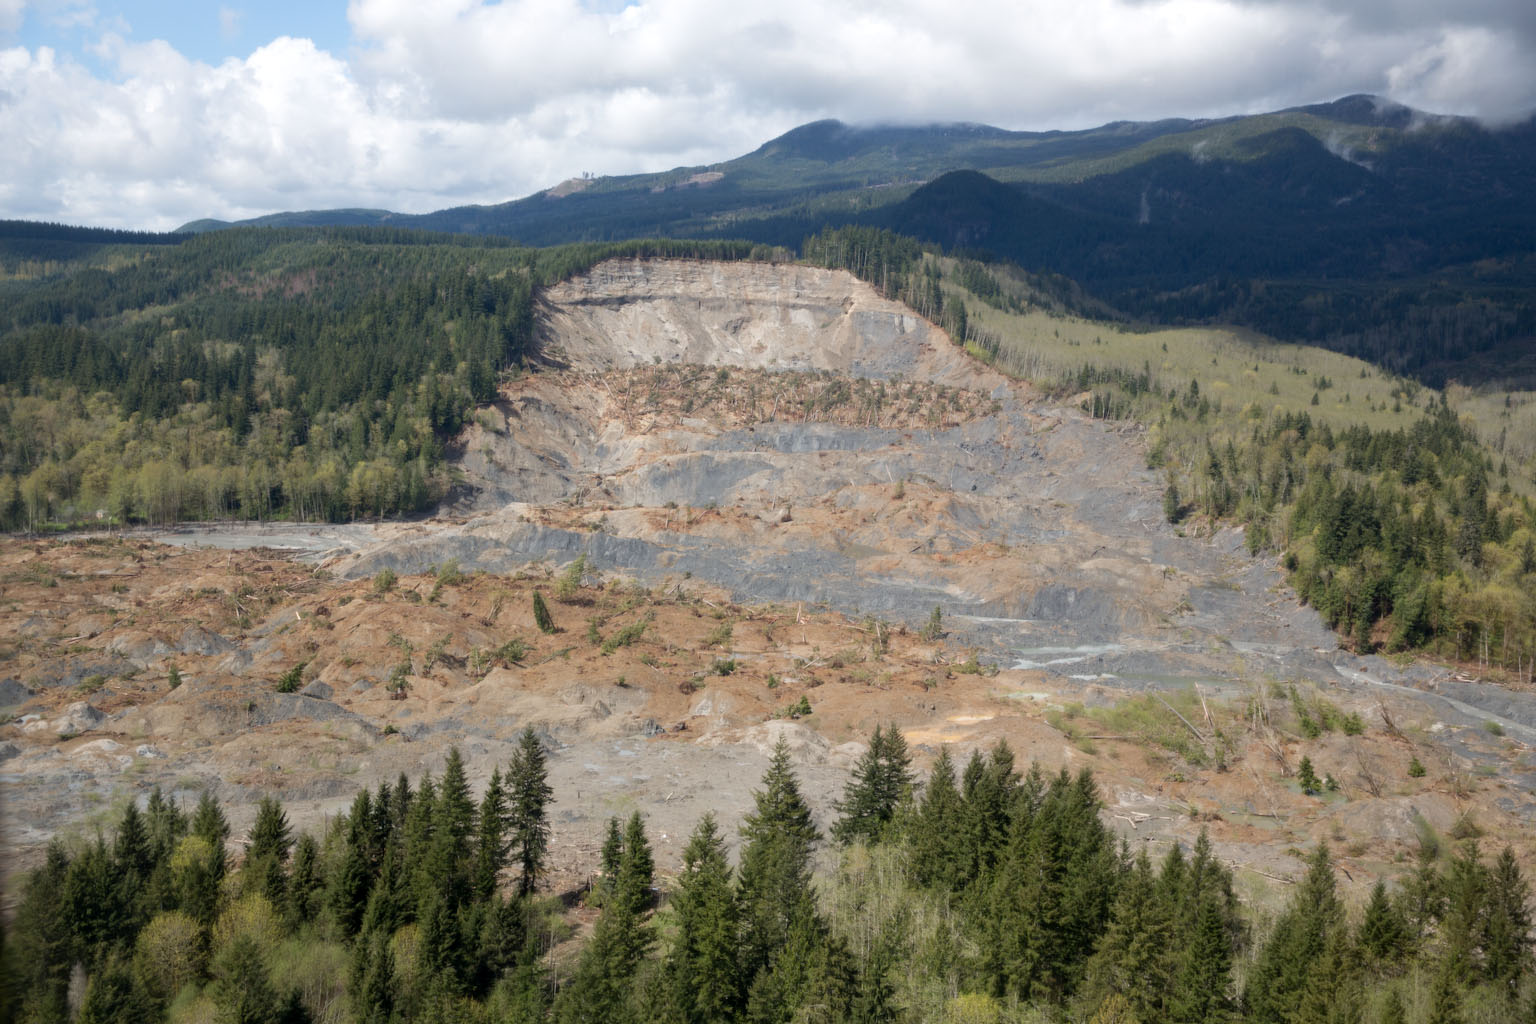 The view of the mudslide from Marine One, in Oso, Wash., April 22, 2014